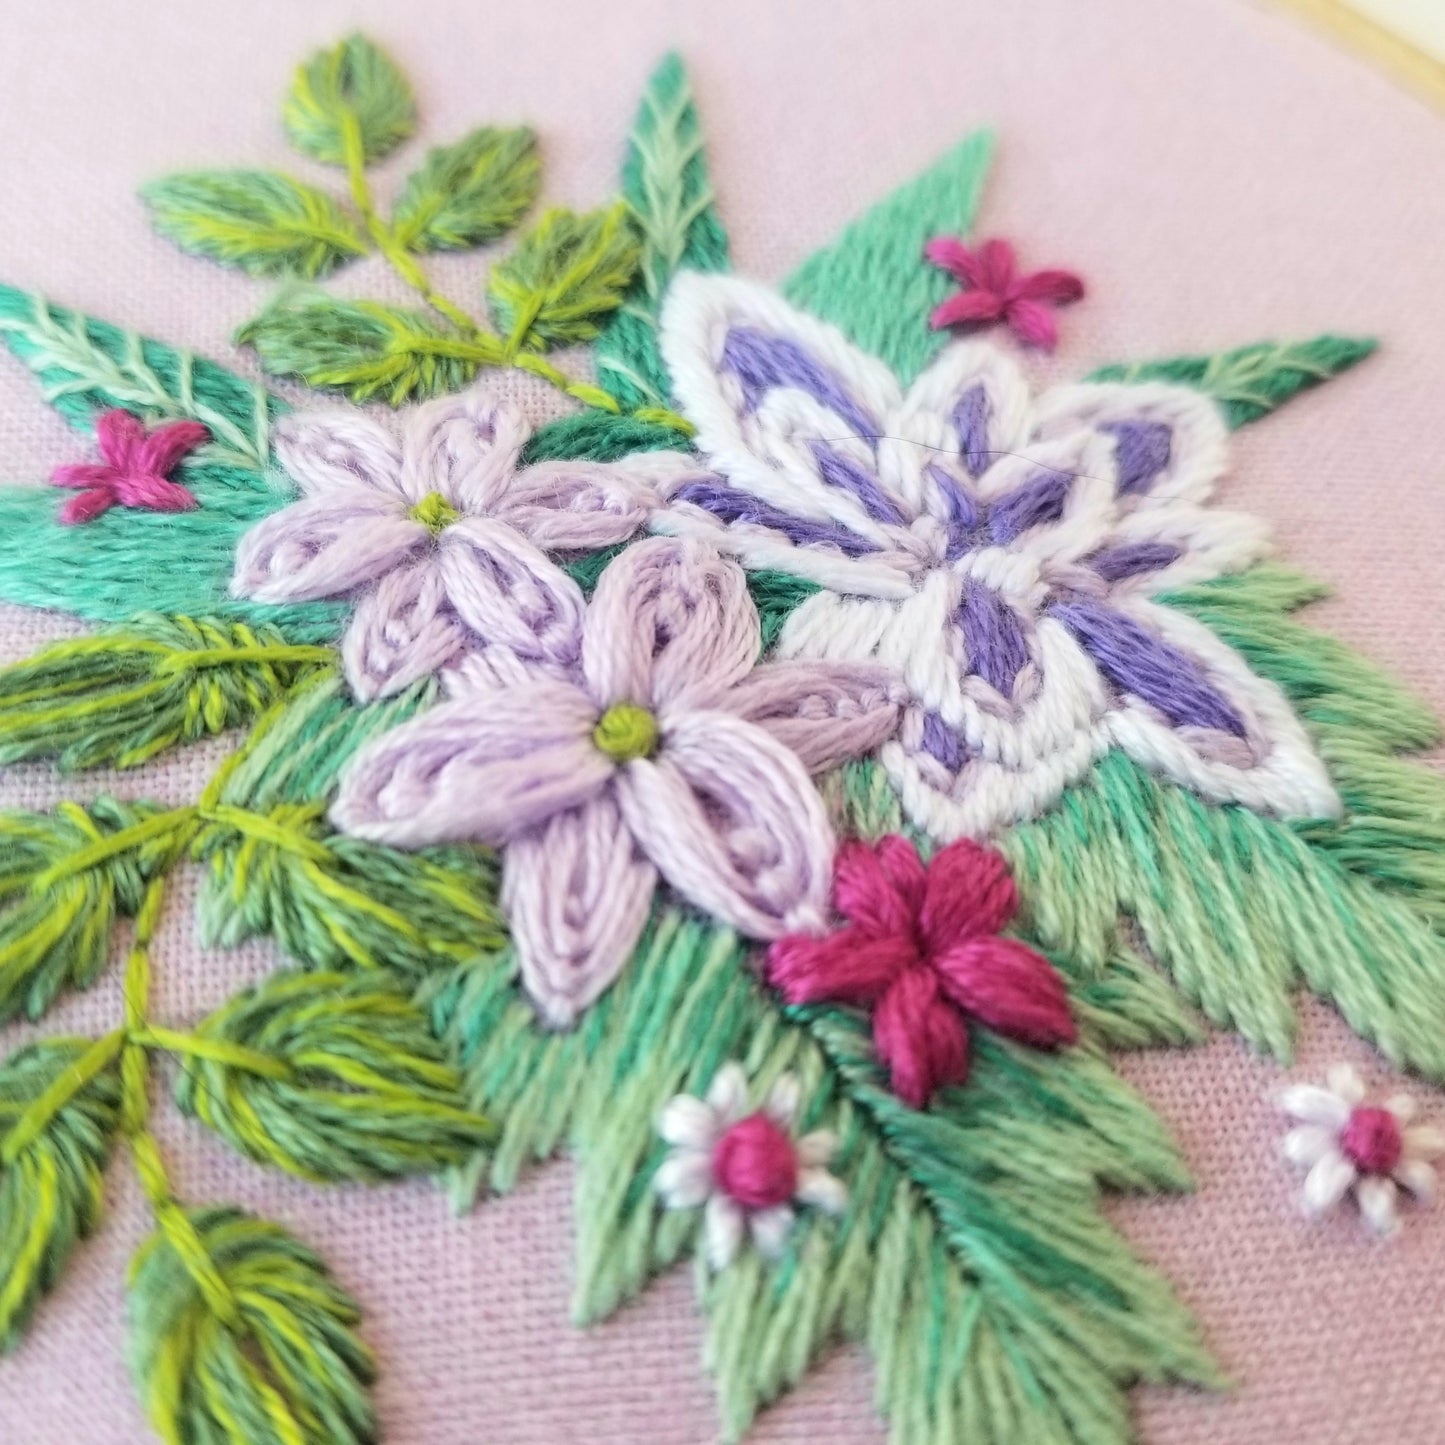 Tender Petals Embroidery Pattern (PDF)